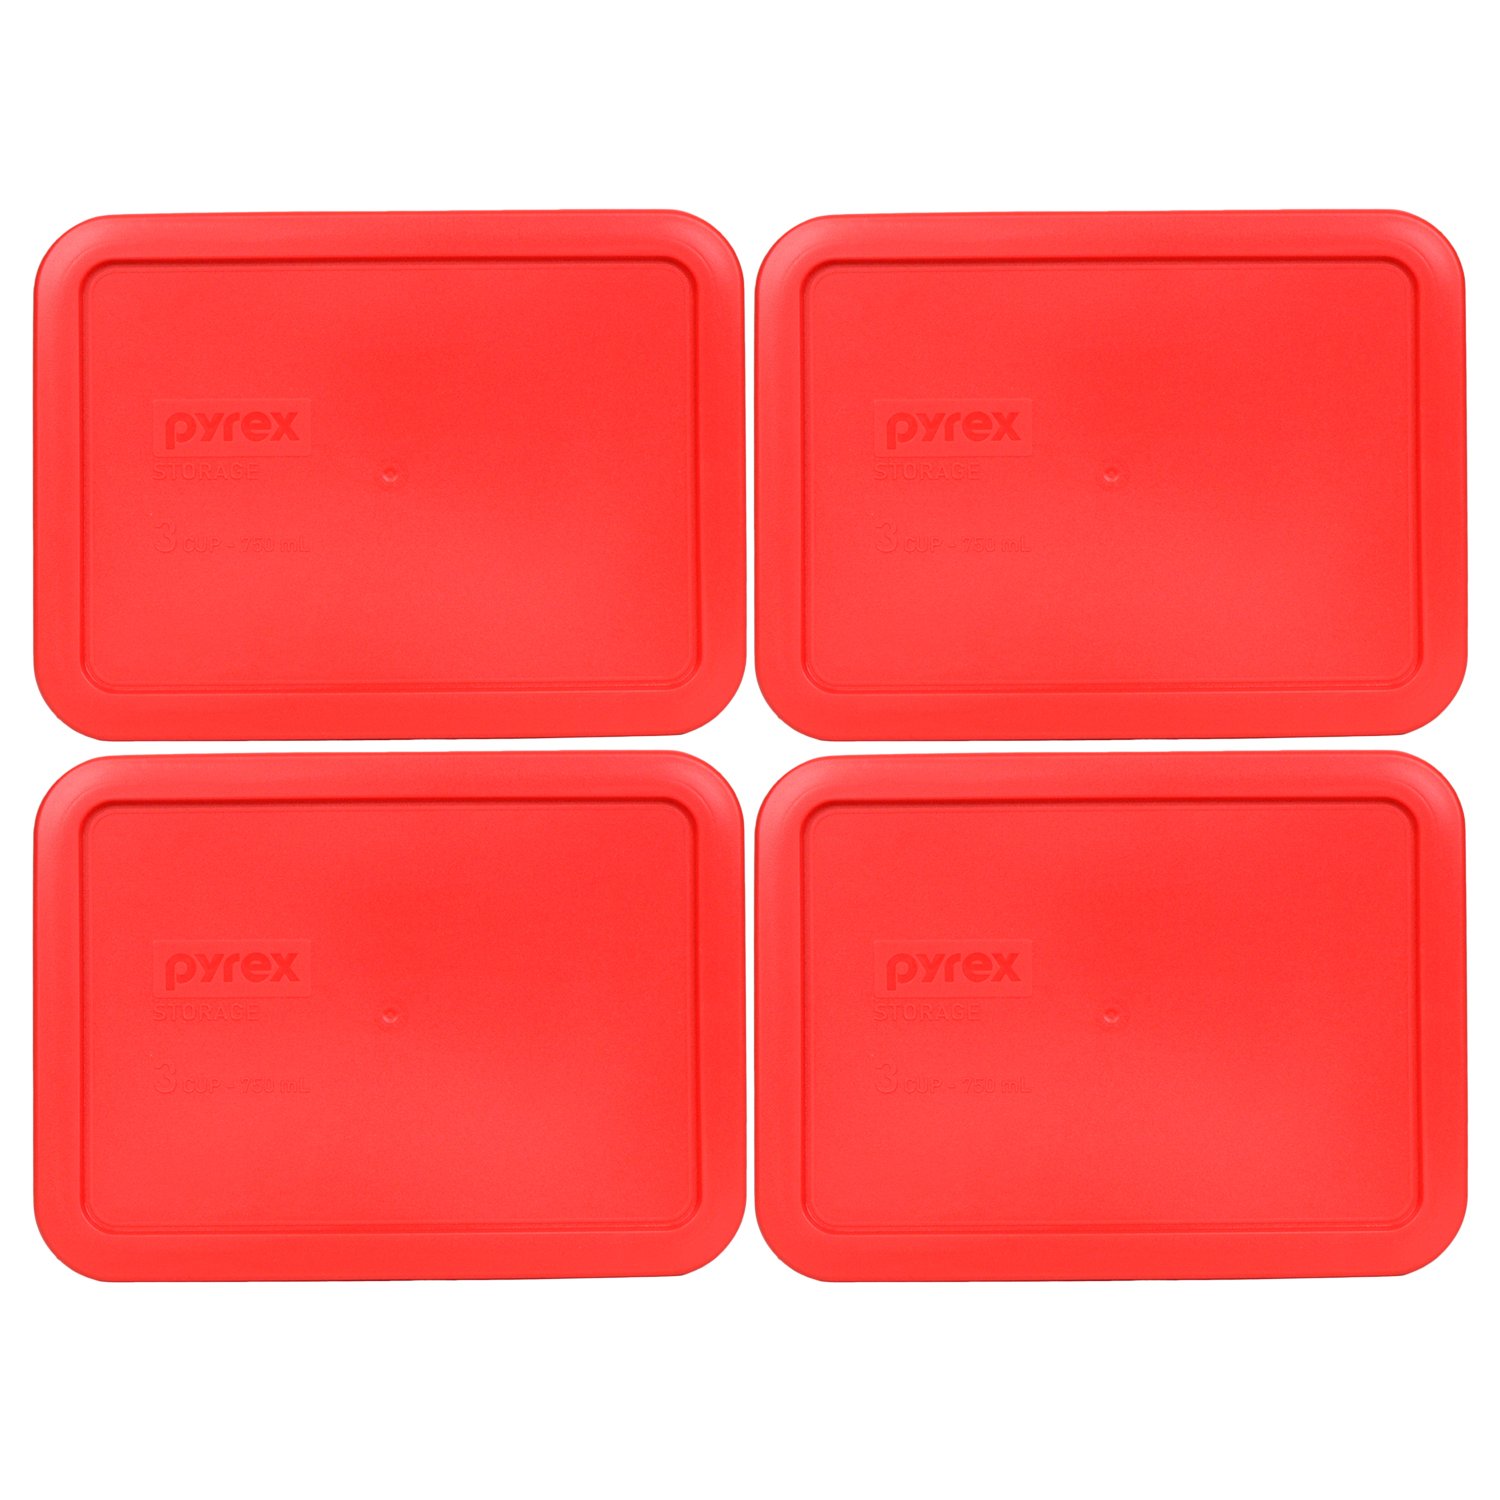 Pyrex 7210-PC 3-Cup Red Plastic Food Storage Replacement Lid Cover, Made in the USA - 4 Pack